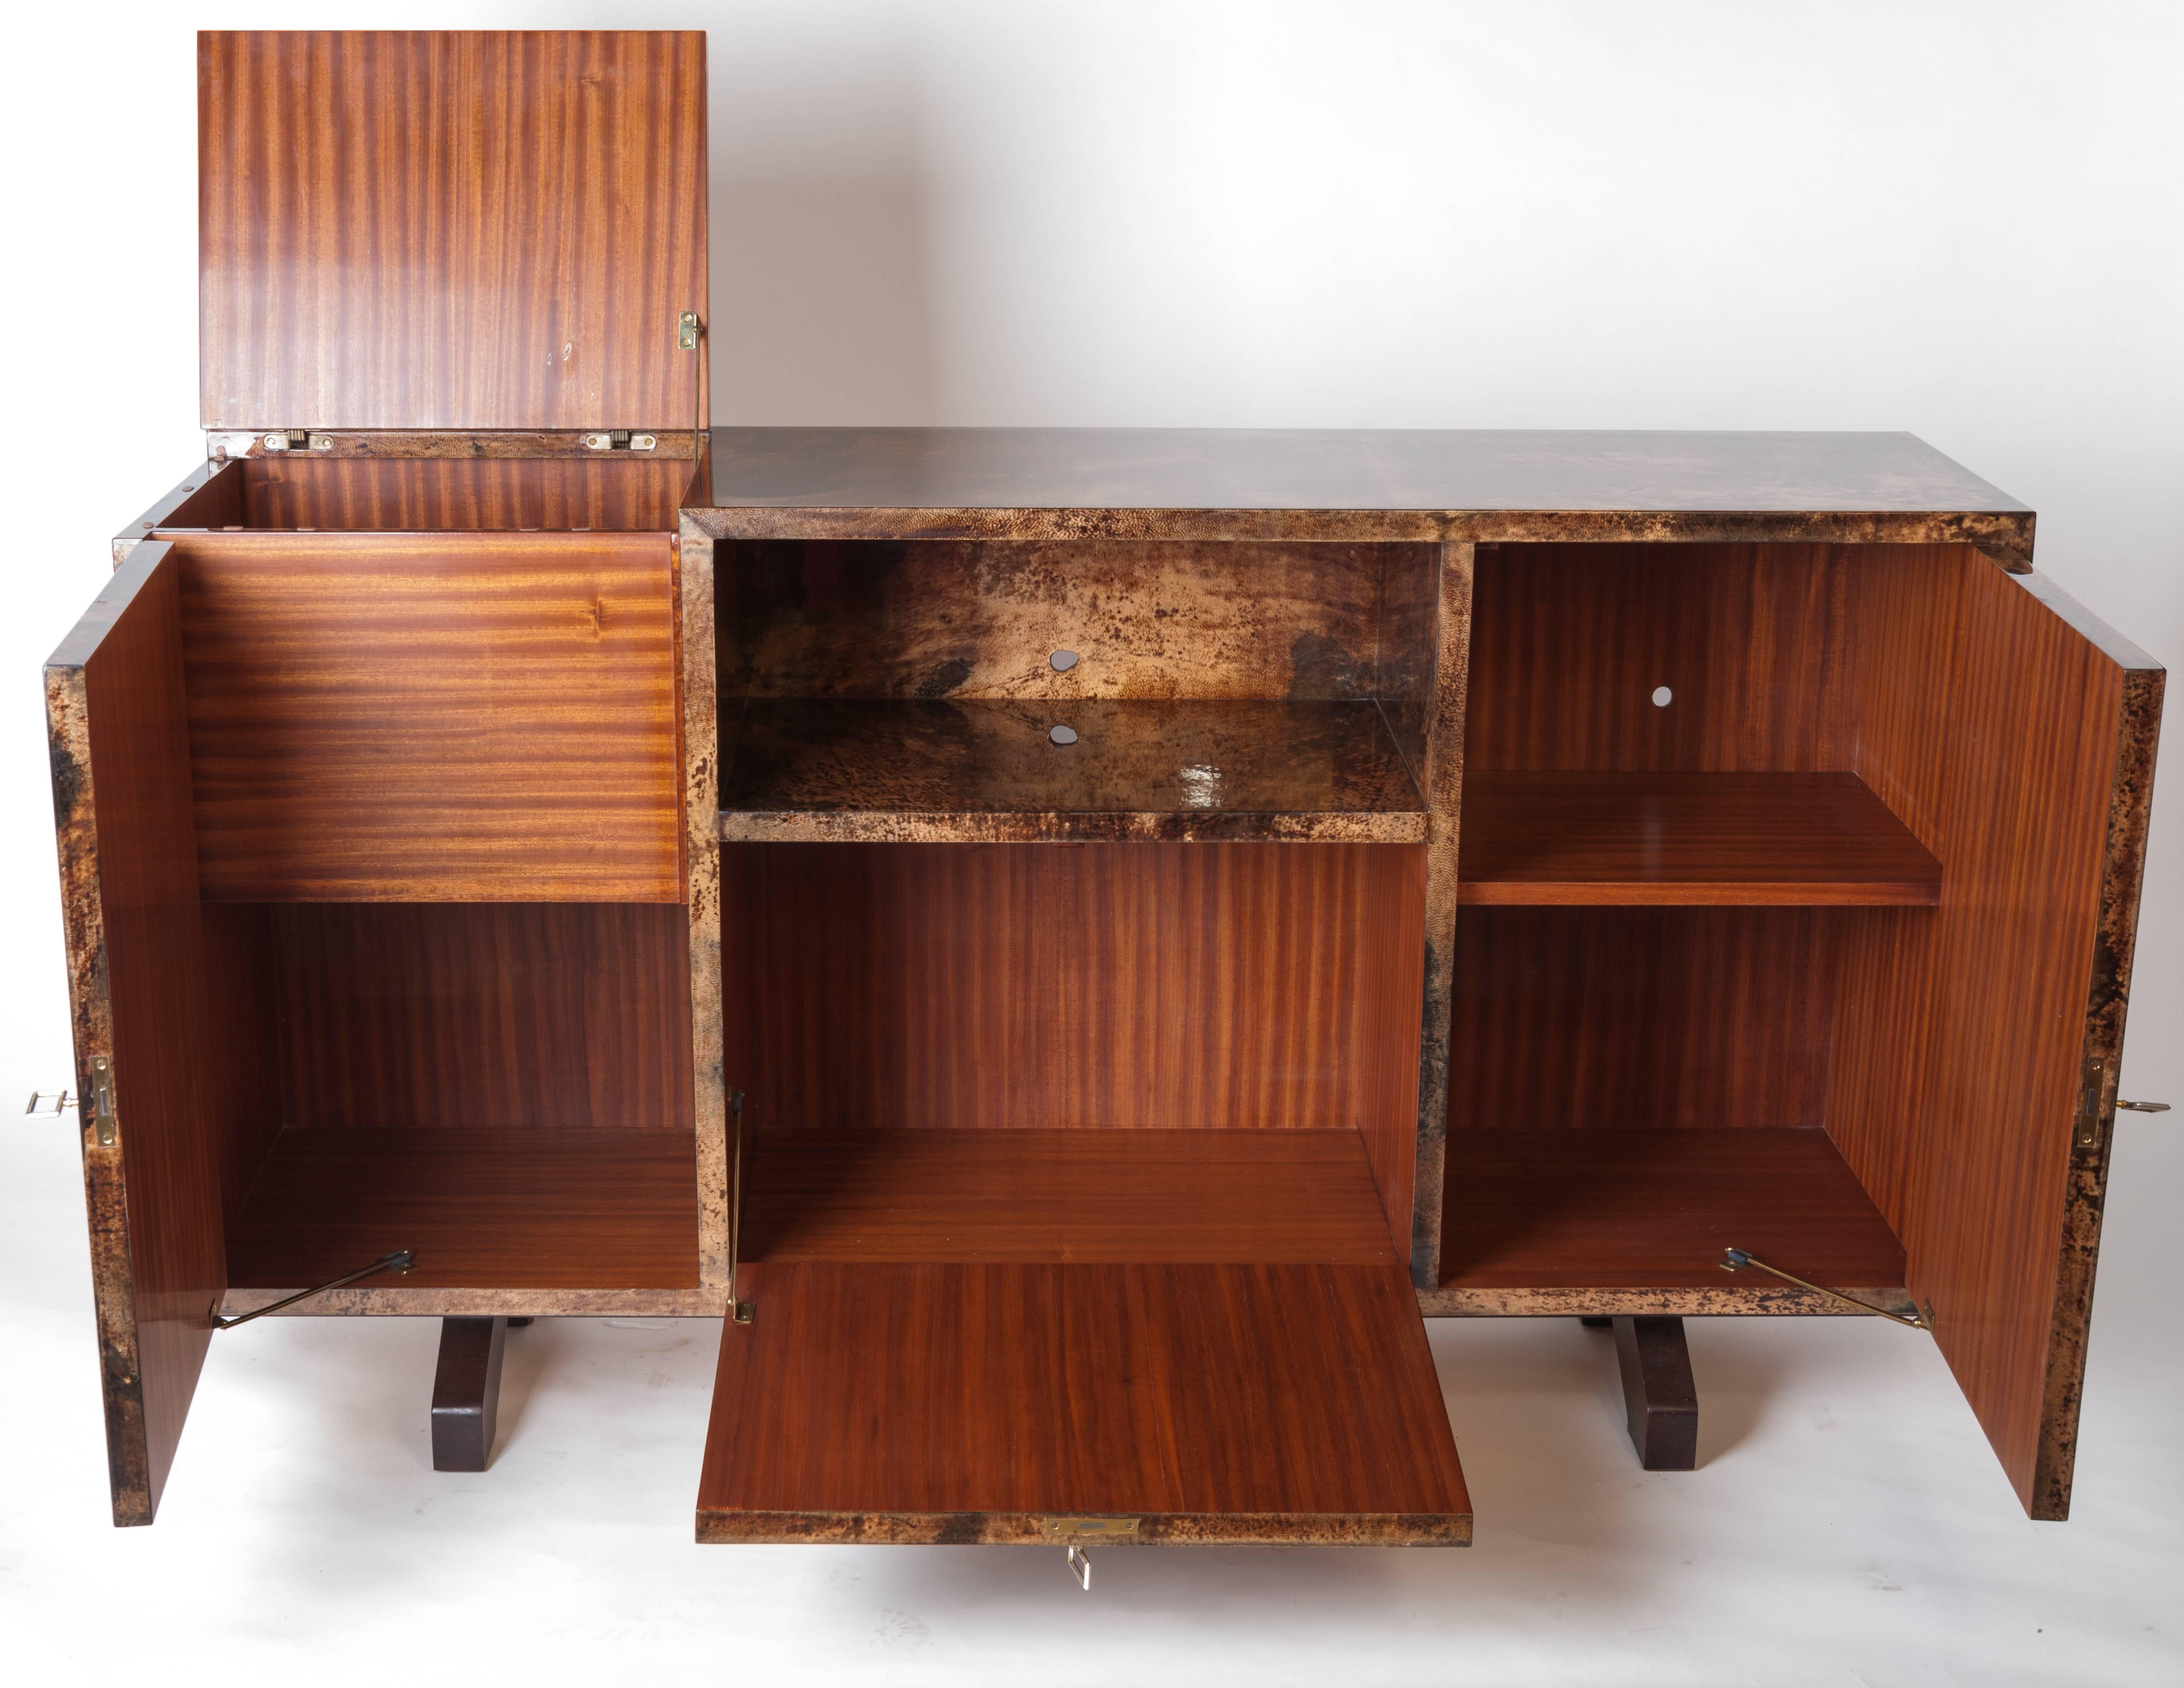 A very elegant and hard to find sideboard and bar by the famous designer Aldo Tura.

Italian designer and manufacturer Aldo Tura, born in 1909, opened his furniture company in 1939 in Lombardy. His works moved between Art Deco and Modernism. Tura